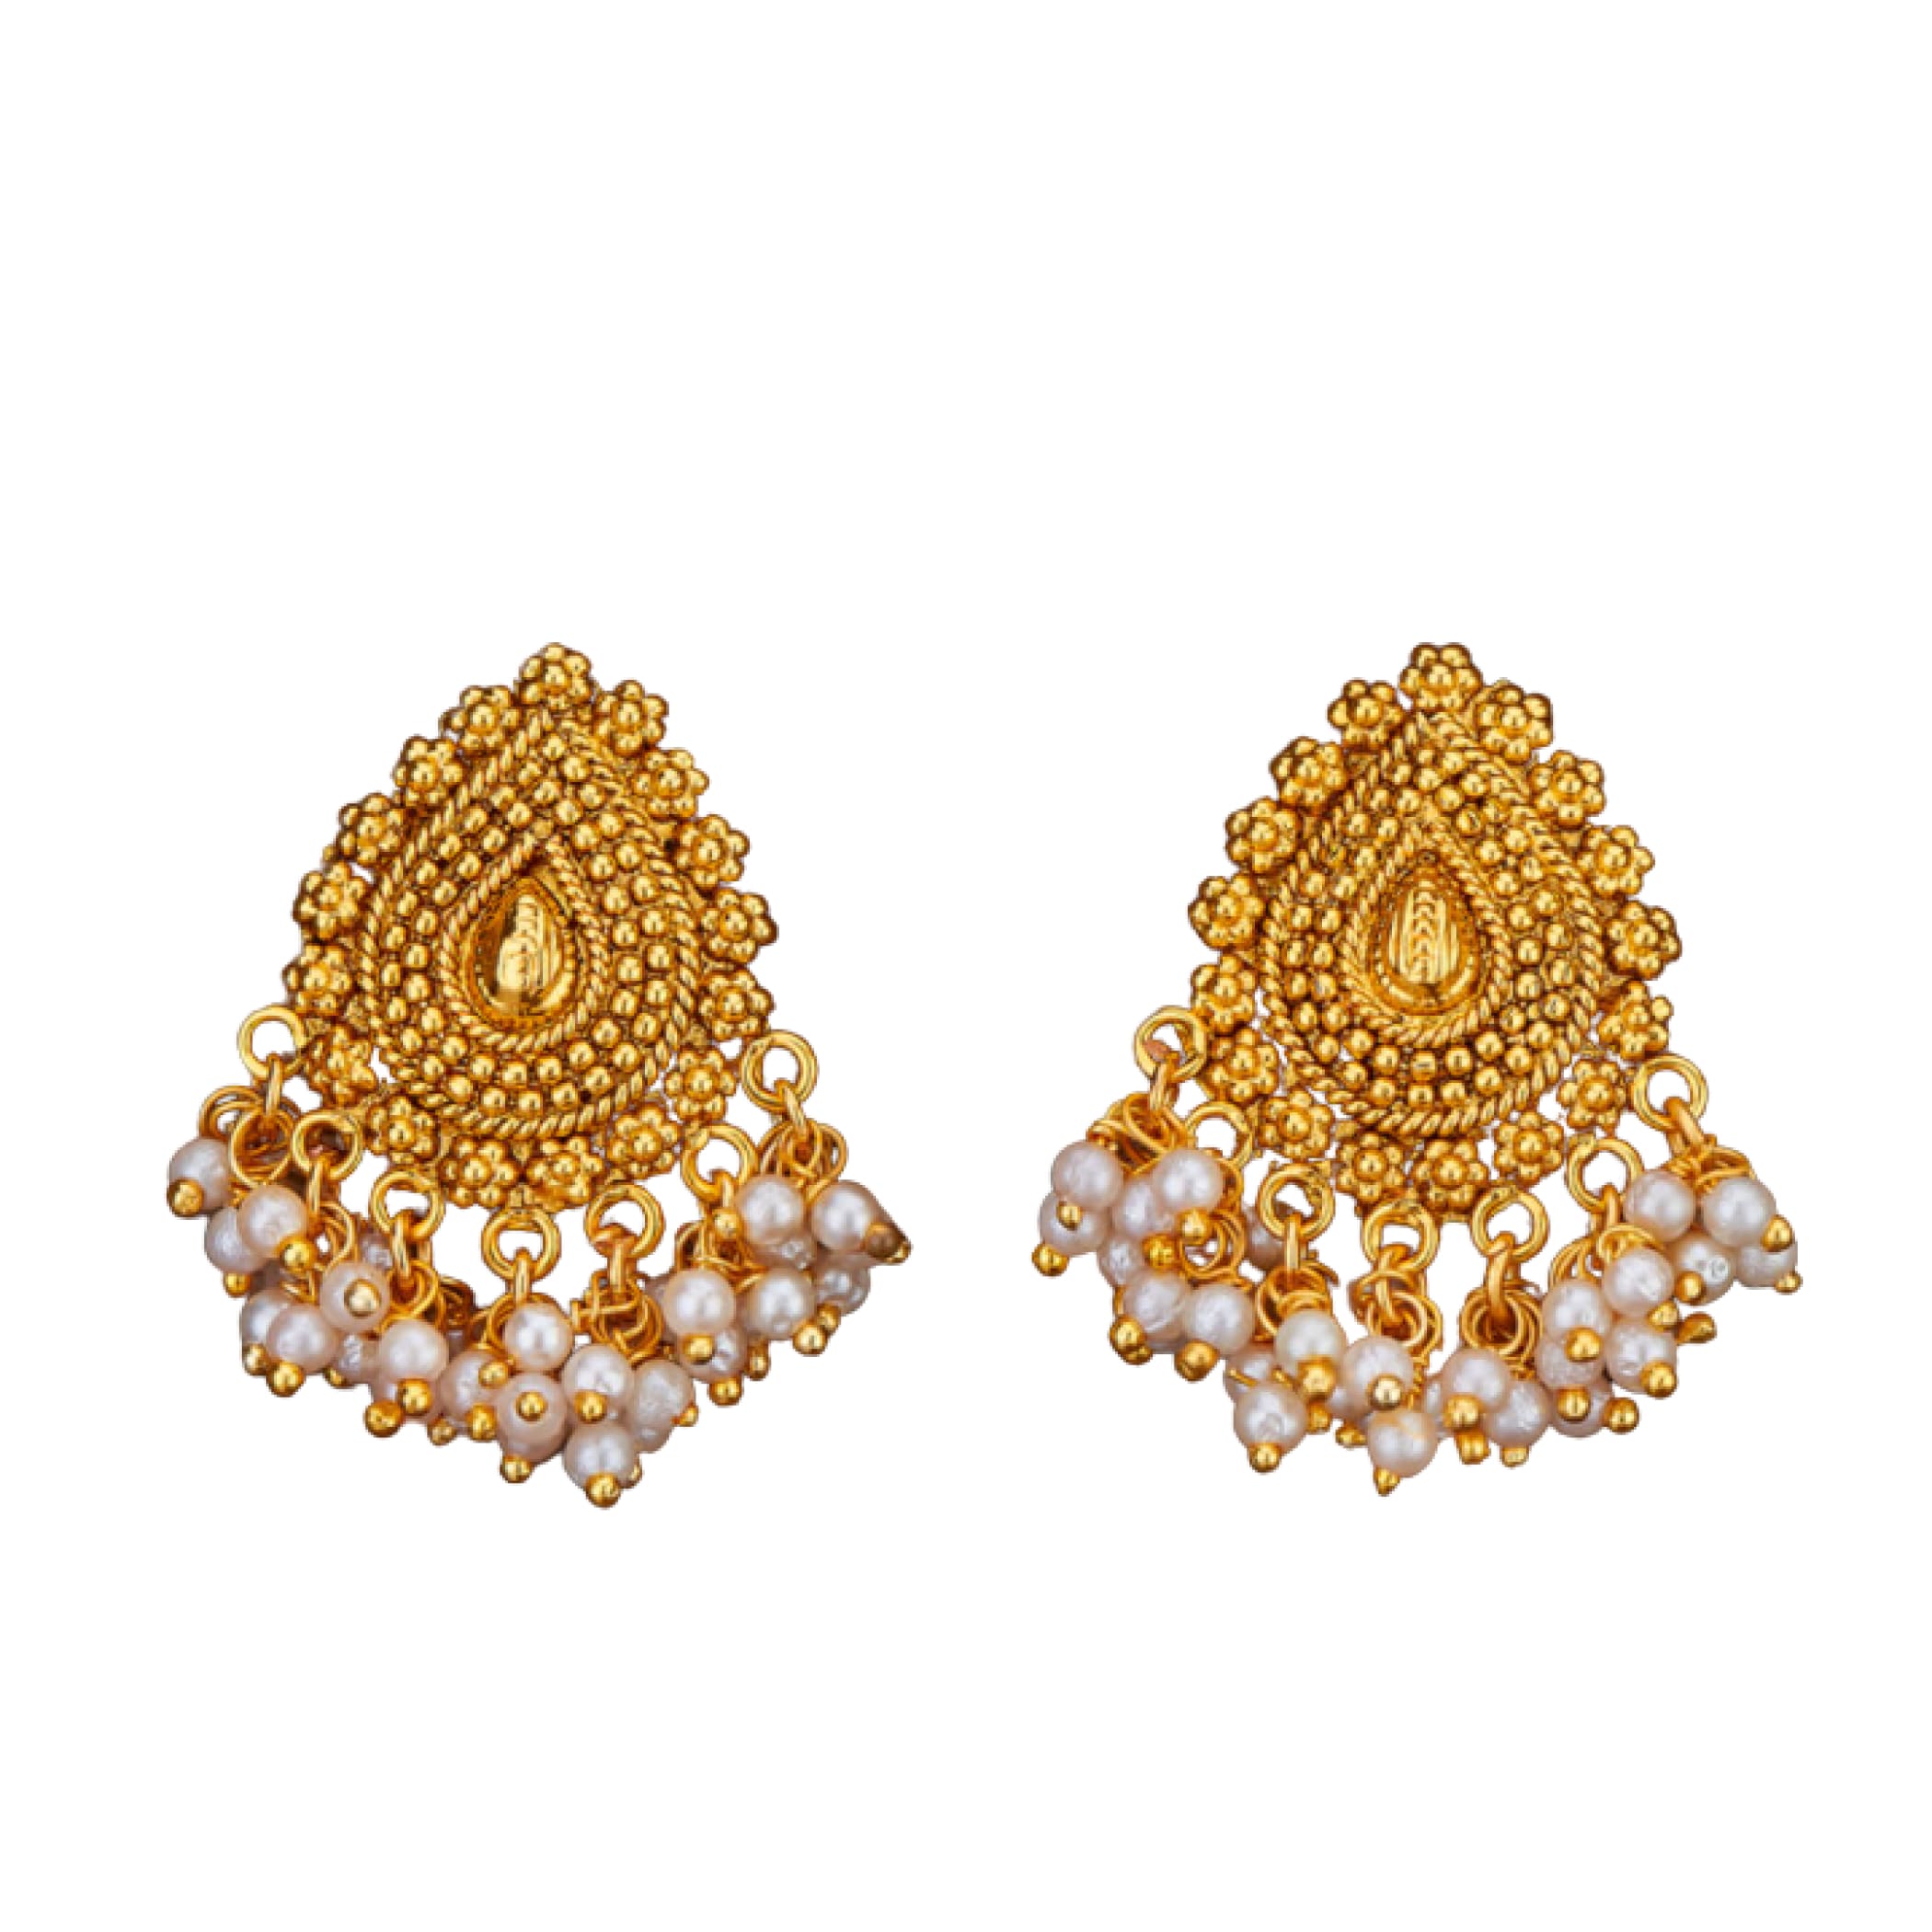 Ethnic Chandelier Earrings Traditional South Indian